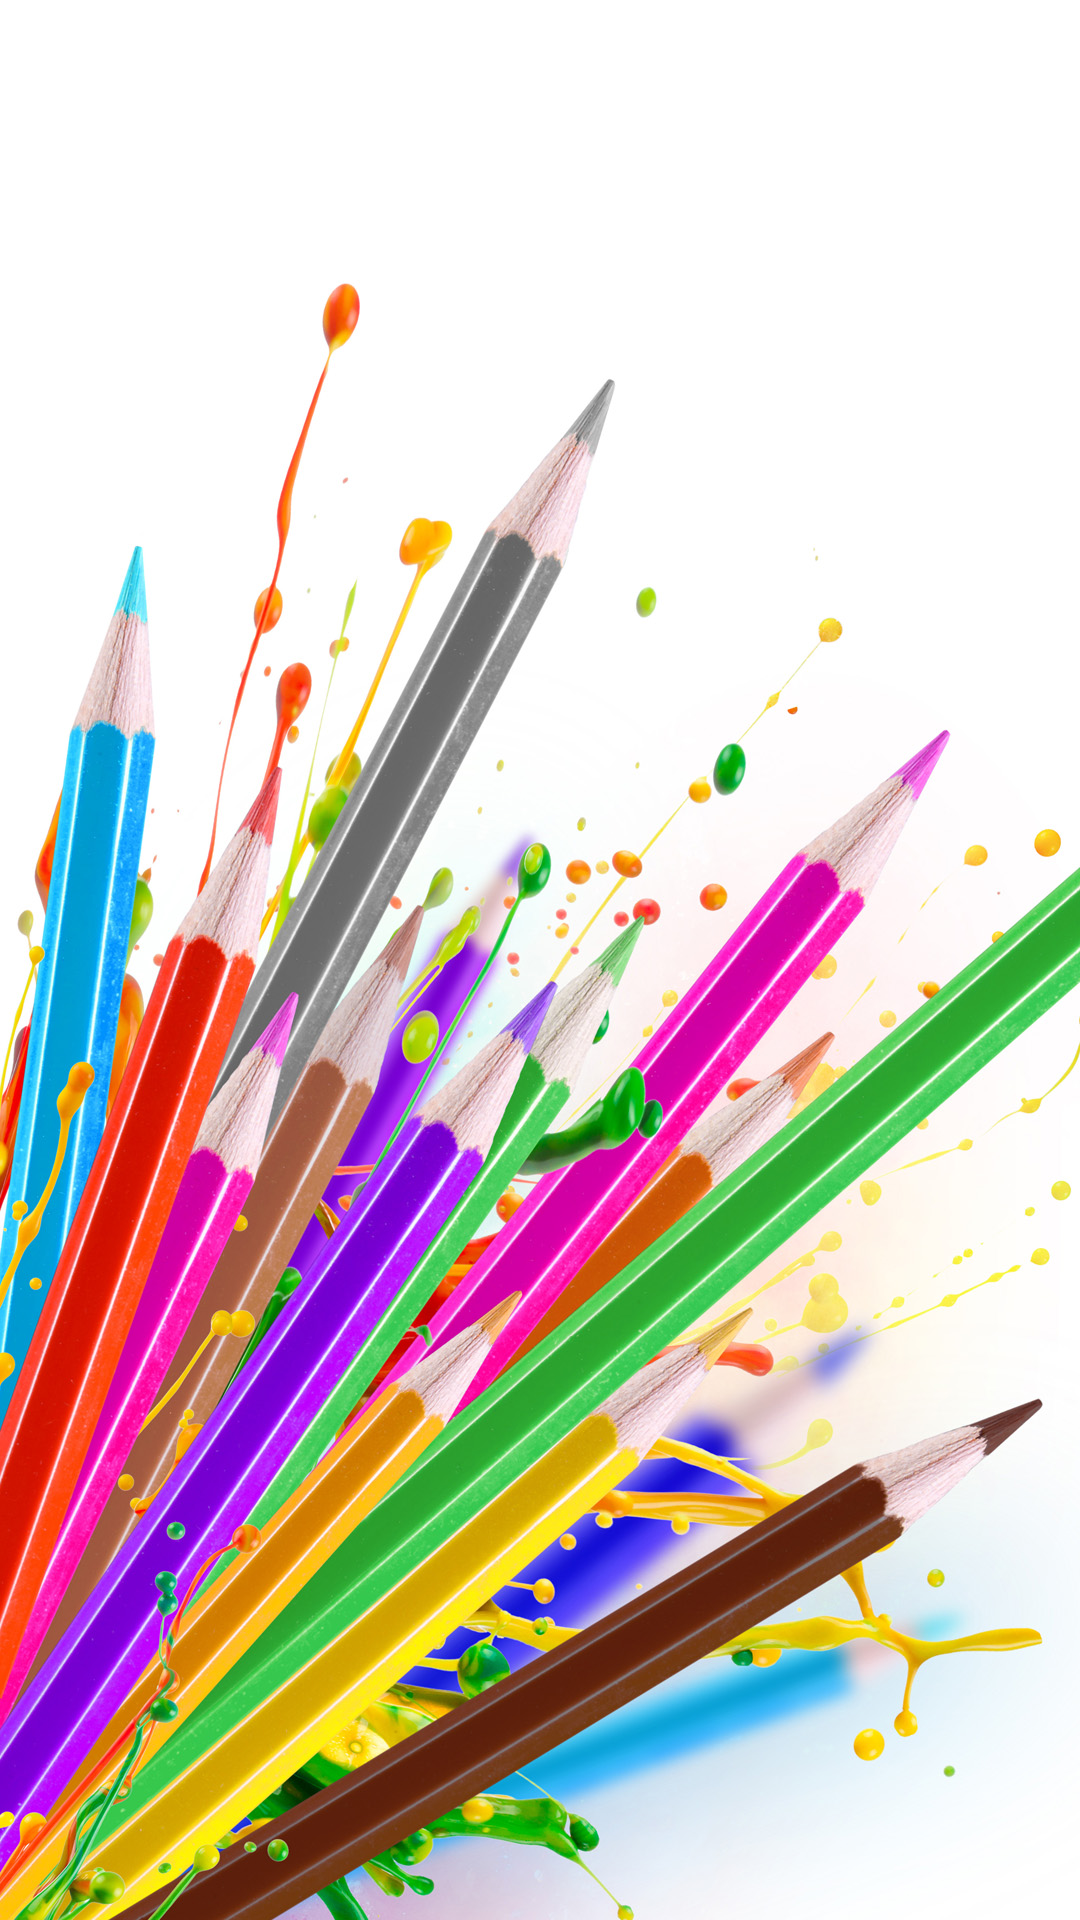 240 Pencil HD Wallpapers and Backgrounds